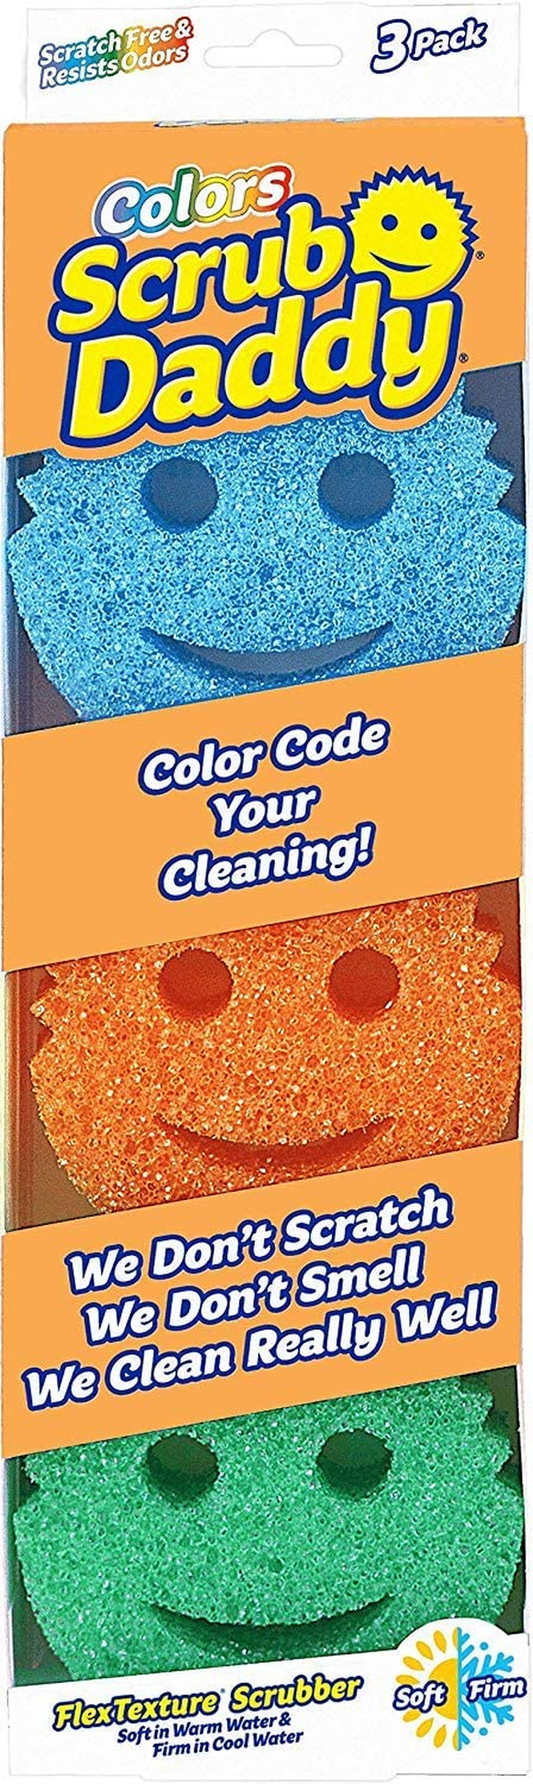 Sponge Set - Colors - Scratch-Free Sponges for Dishes and Home, Odor Resistant, Soft in Warm Water, Firm in Cold, Deep Cleaning, Dishwasher Safe, Multi-Use, Functional, Ergonomic, 3Ct